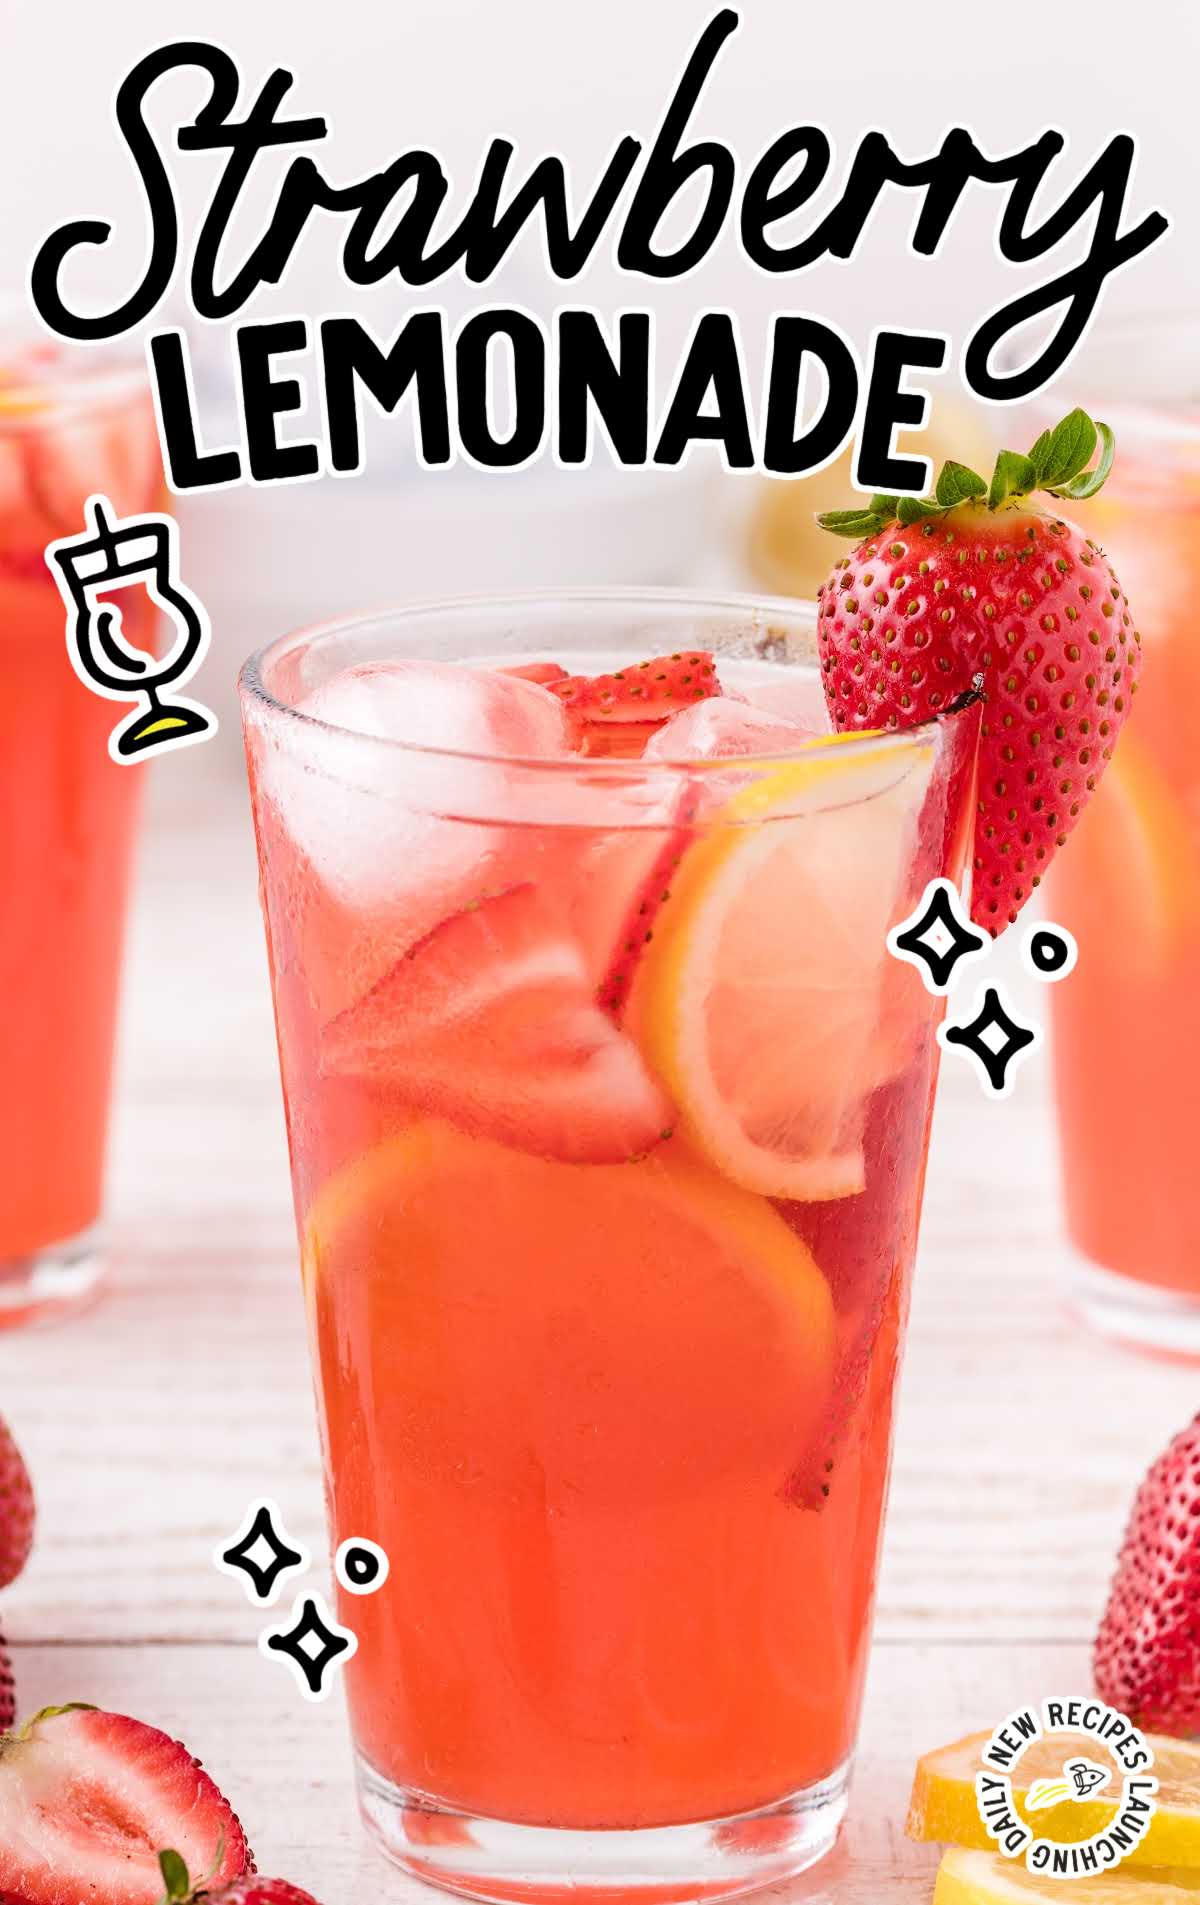 close up shot of a glass full of Strawberry Lemonade garnished with strawberries and lemon